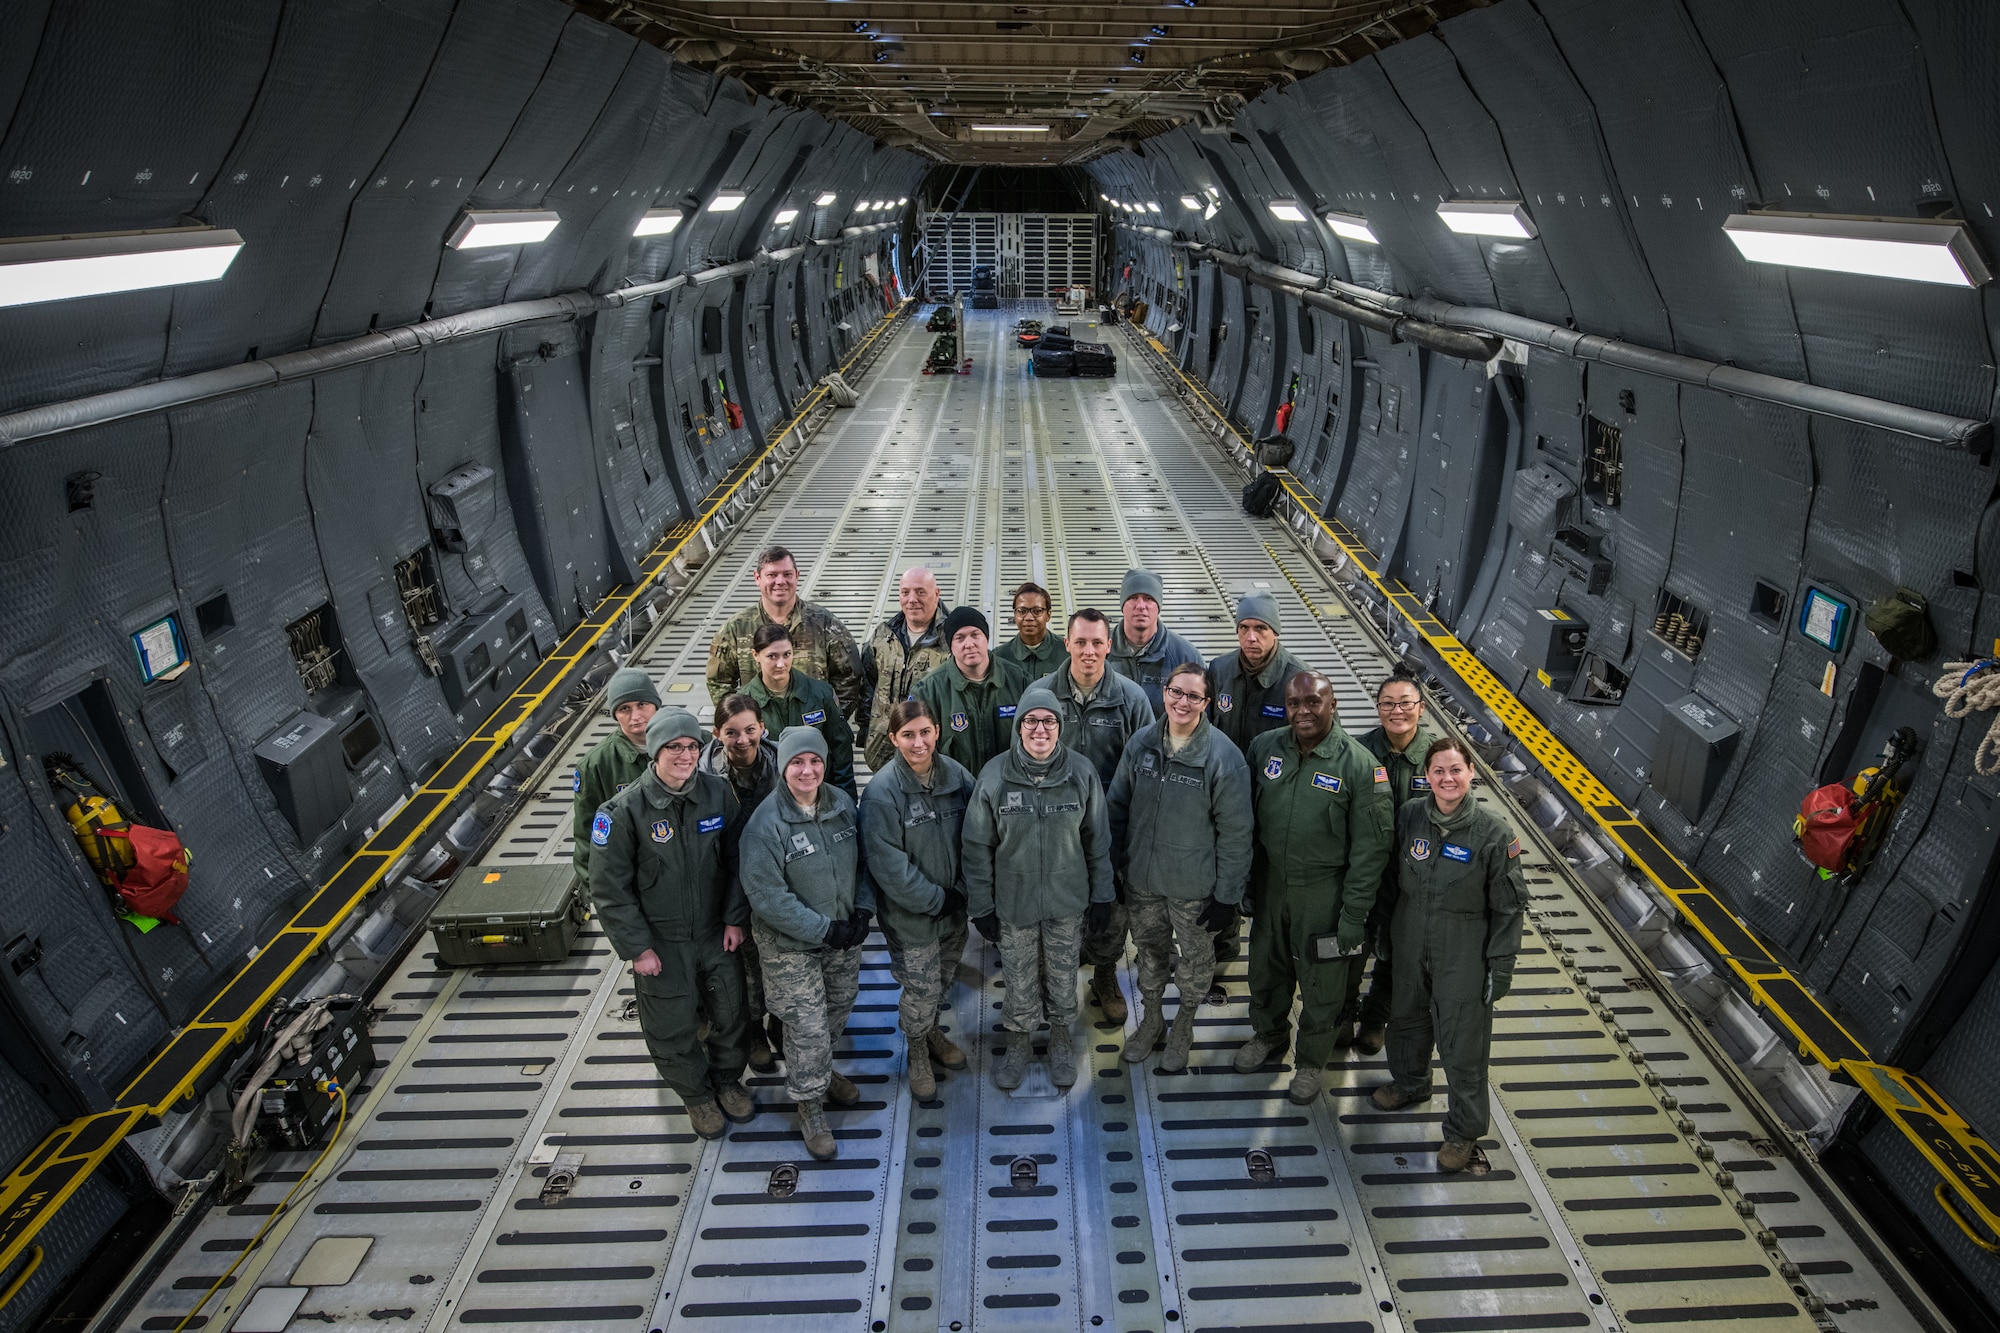 Citizen Airmen with 932nd Airlift Wing, Aeromedical Evacuation Squadron, pose for a photo after initial training on the C-5M Super Galaxy,  March 2, 2019, Scott Air Force Base, Illinois. The training prepares AES members to become more efficient in transferring patients on the C-5M Super Galaxy. (U.S. Air Force photo by Senior Airman Brooke Deiters)